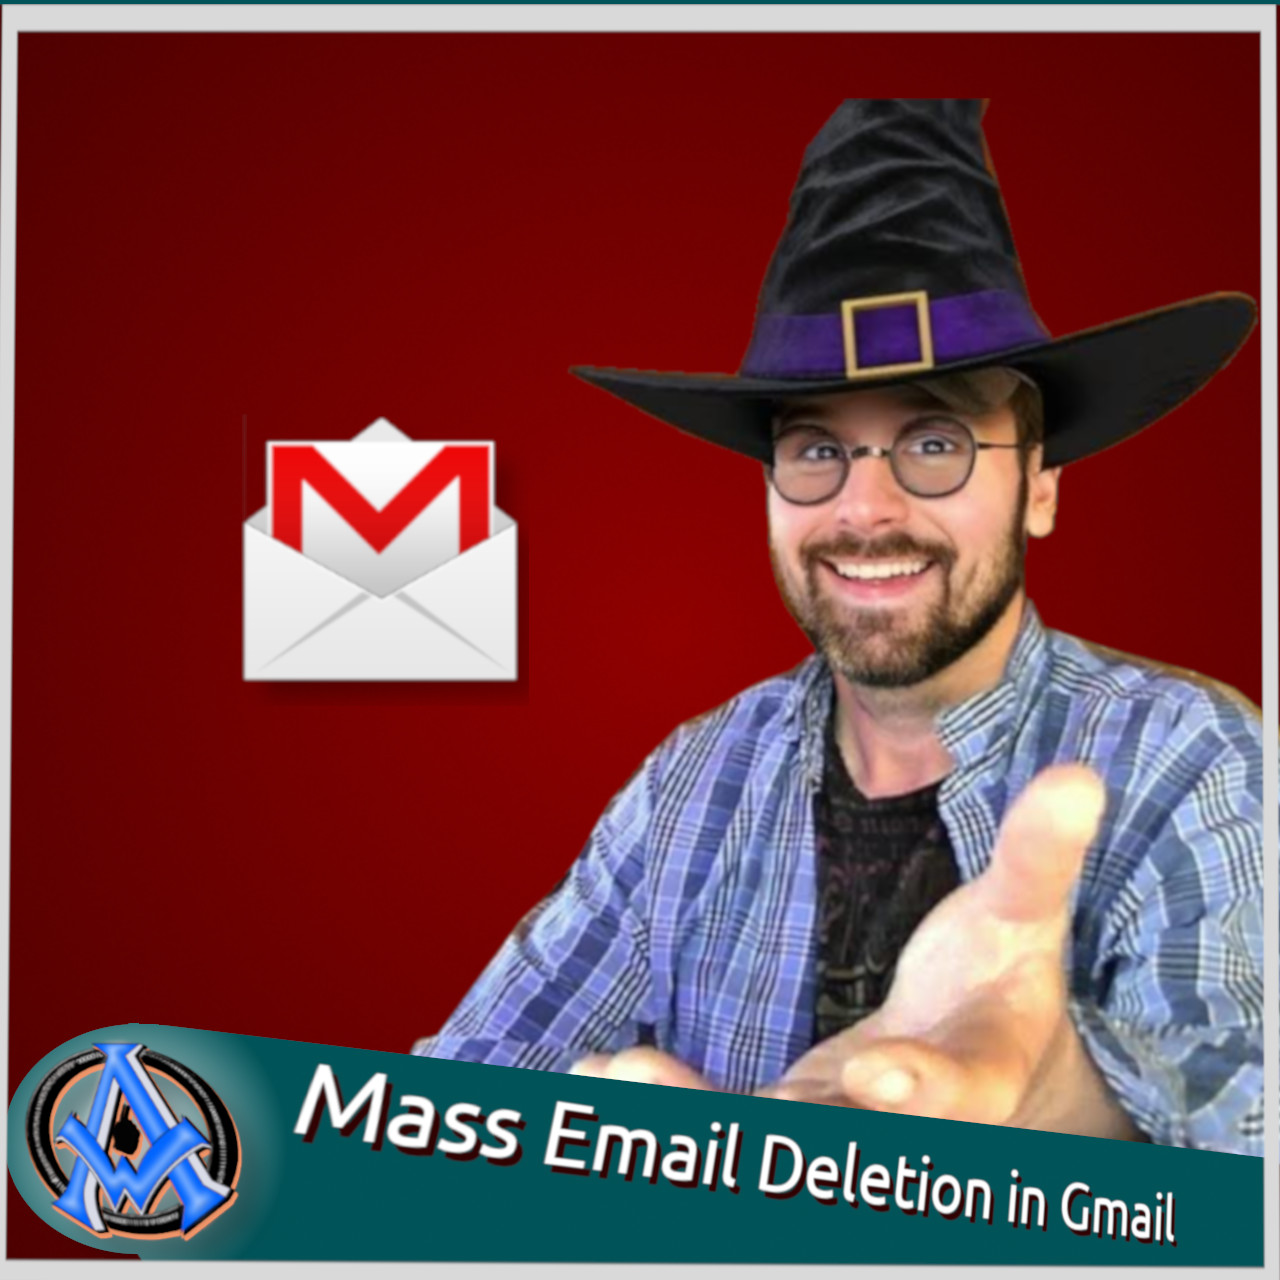 Mass Email Deletion in Gmail